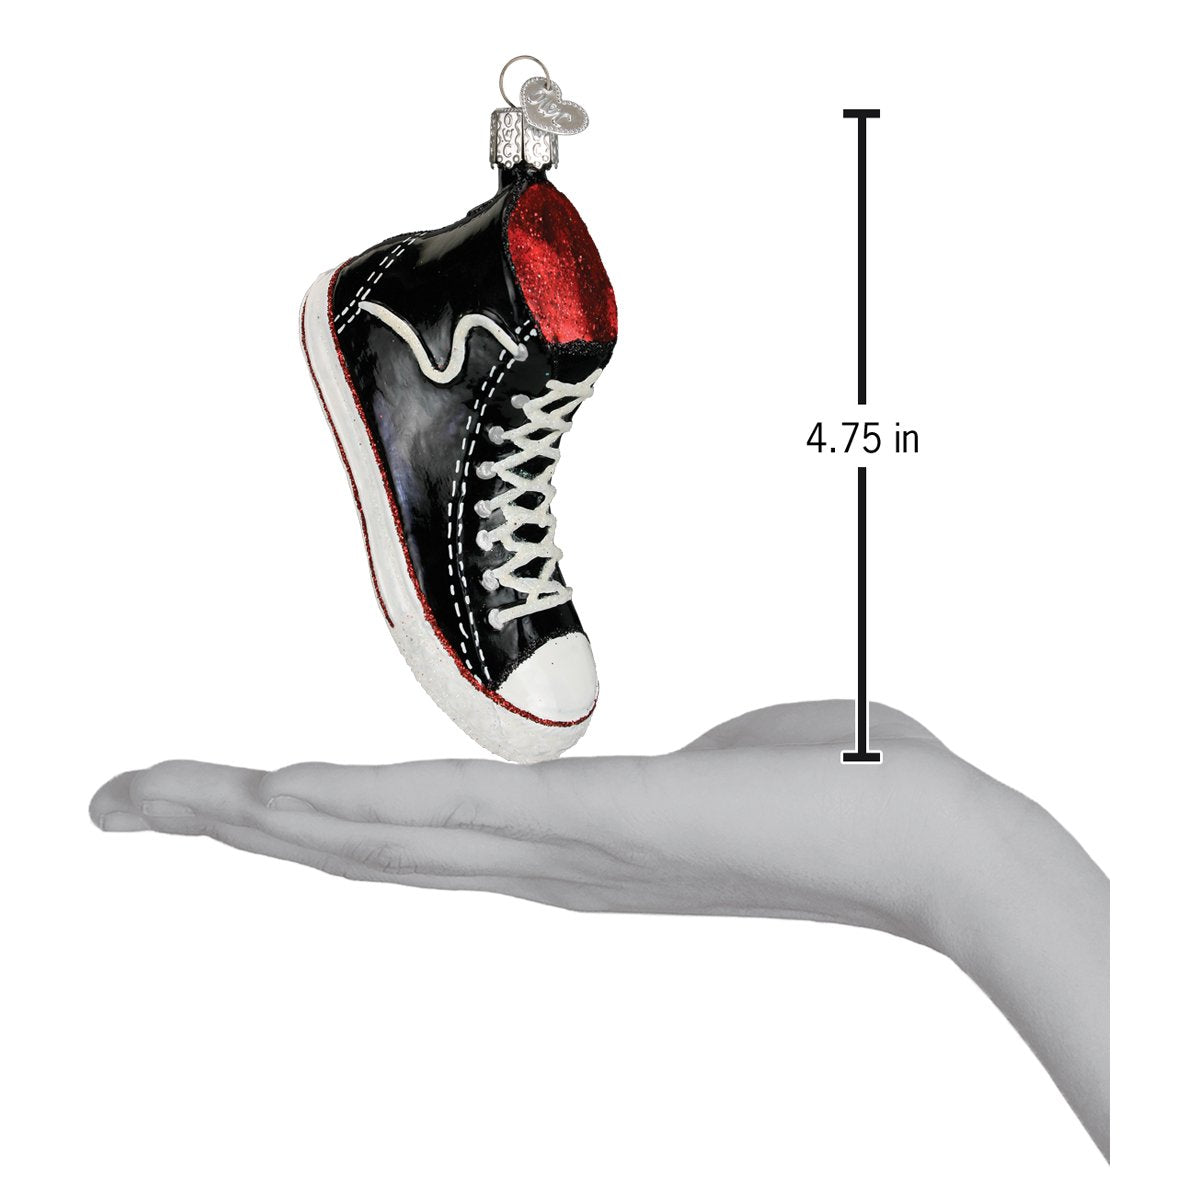 Old World Christmas - High Top Sneaker Ornament    